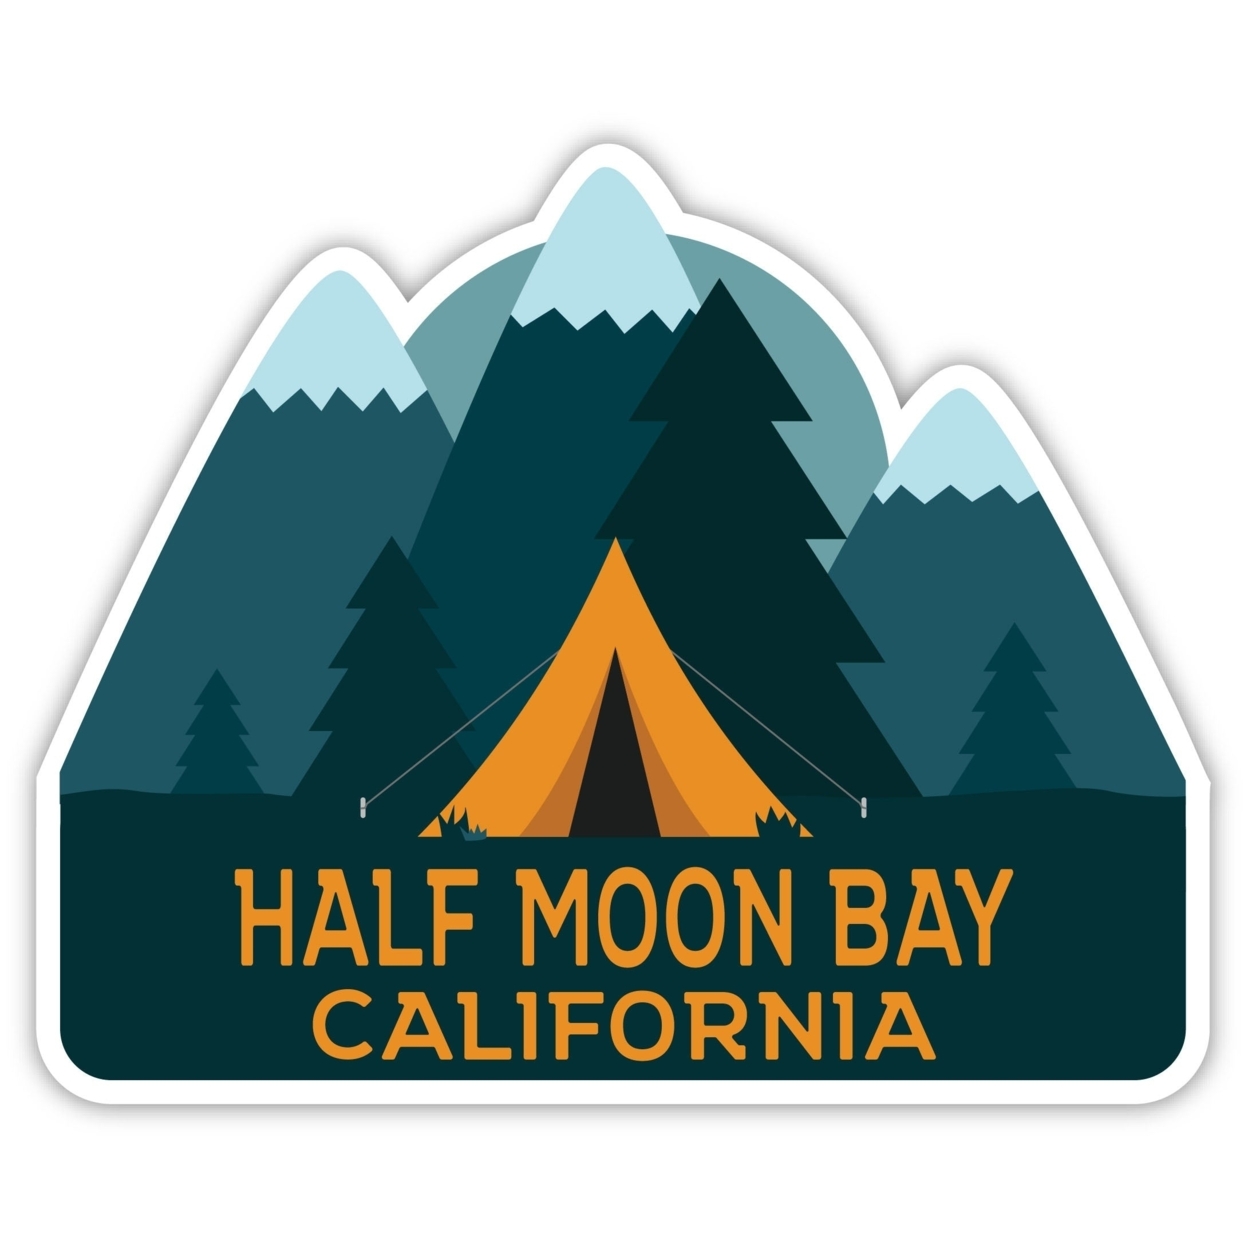 Half Moon Bay California Souvenir Decorative Stickers (Choose Theme And Size) - 4-Pack, 8-Inch, Bear